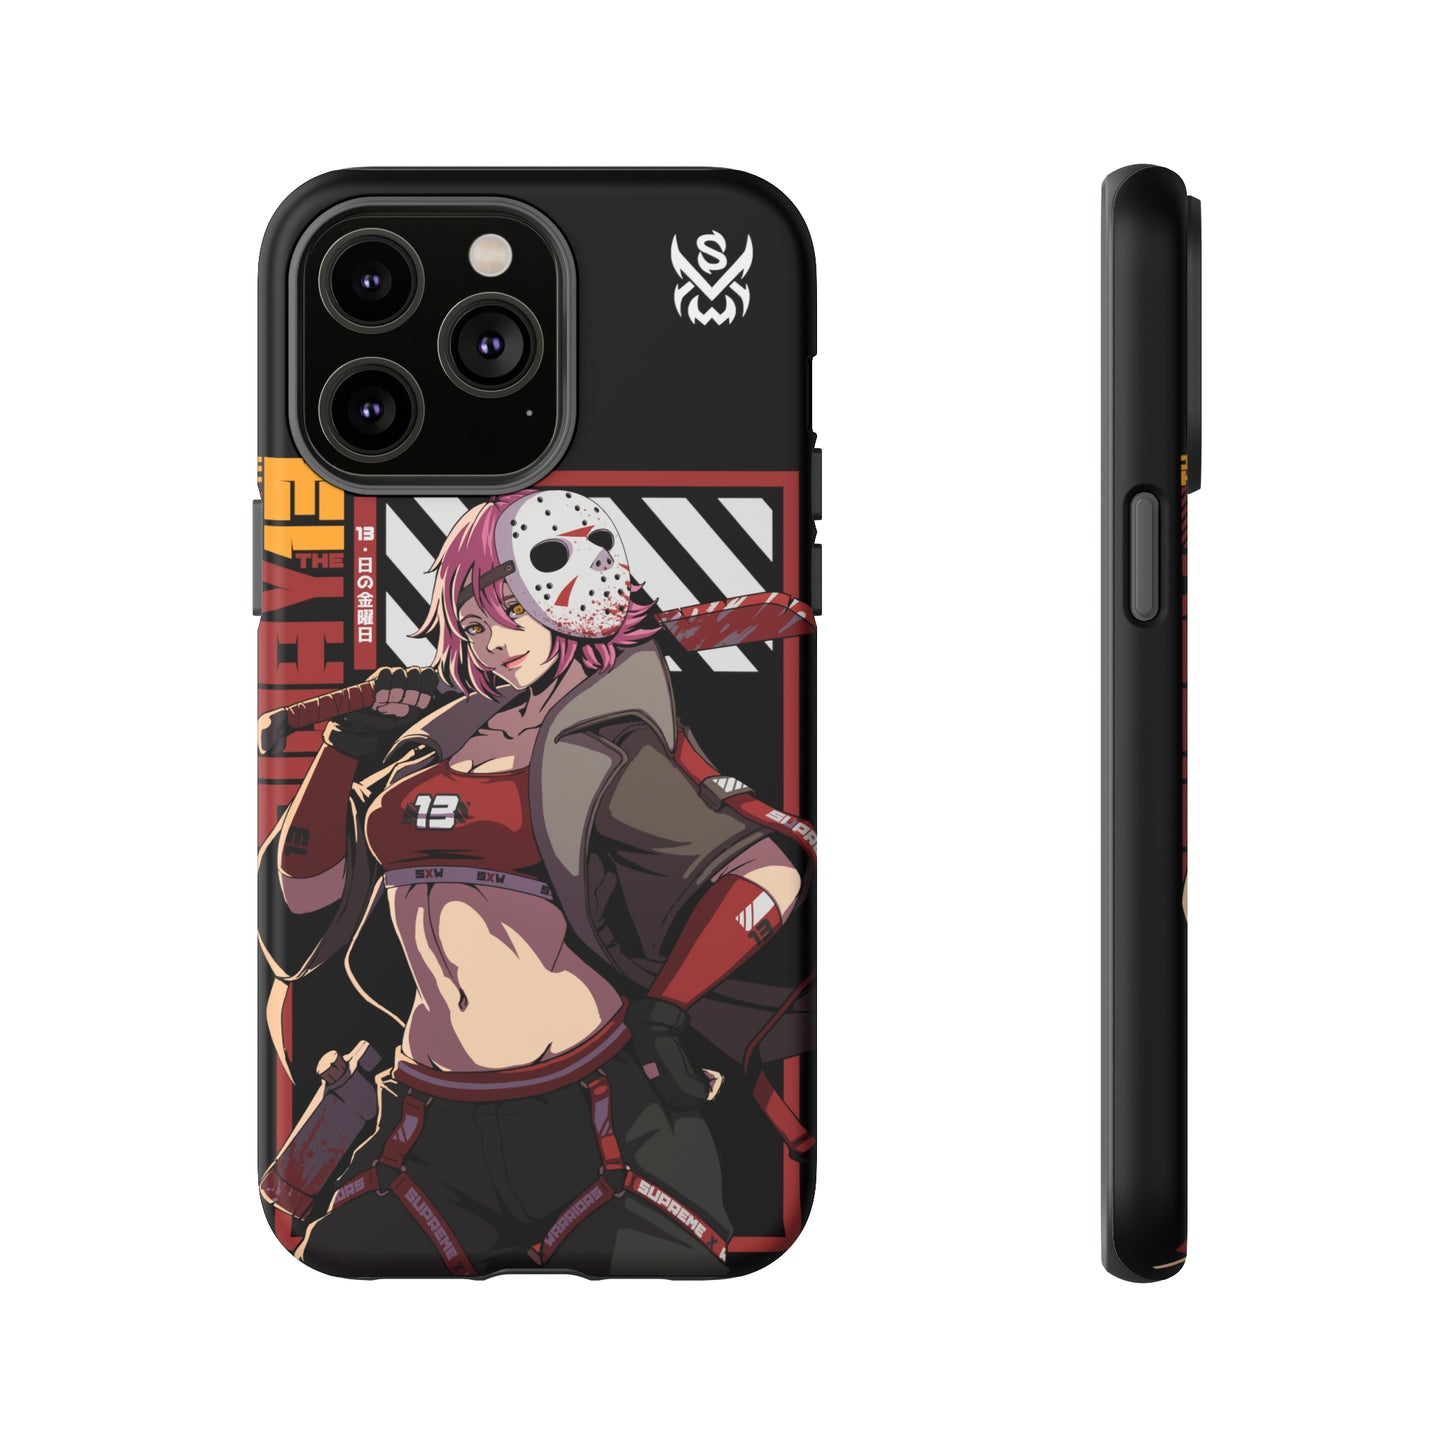 13 / iPhone Case - LIMITED